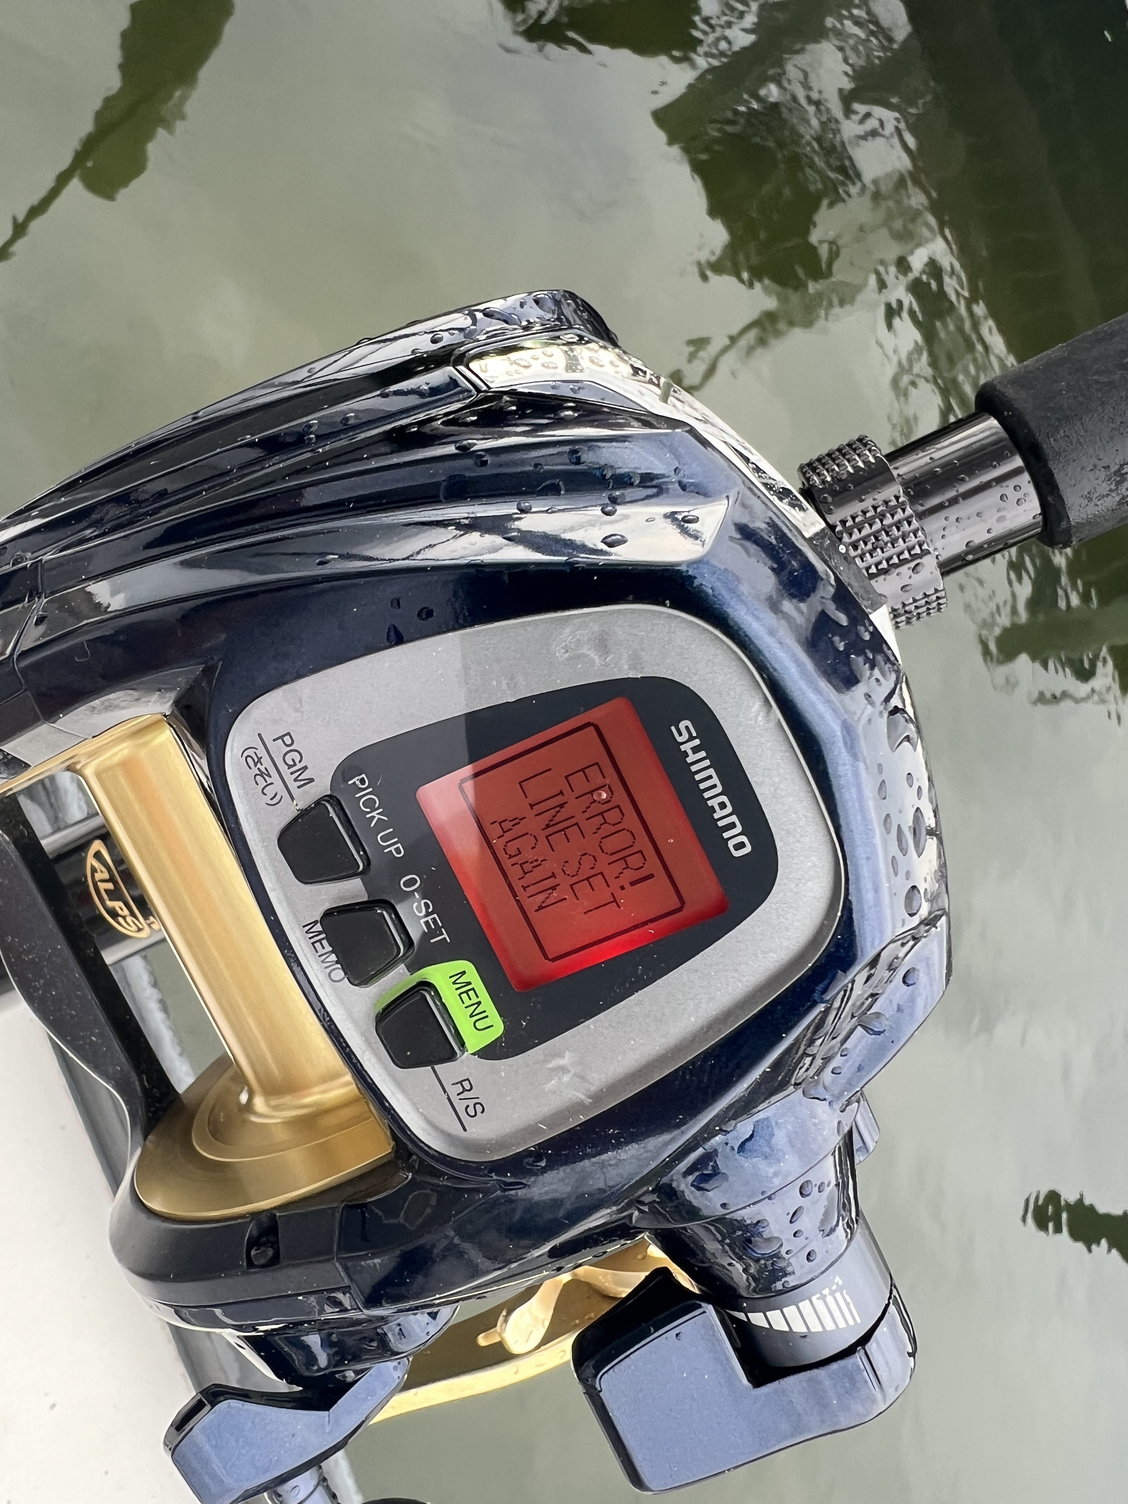 Error message spoiling shimano beastmaster 9000 - The Hull Truth - Boating  and Fishing Forum